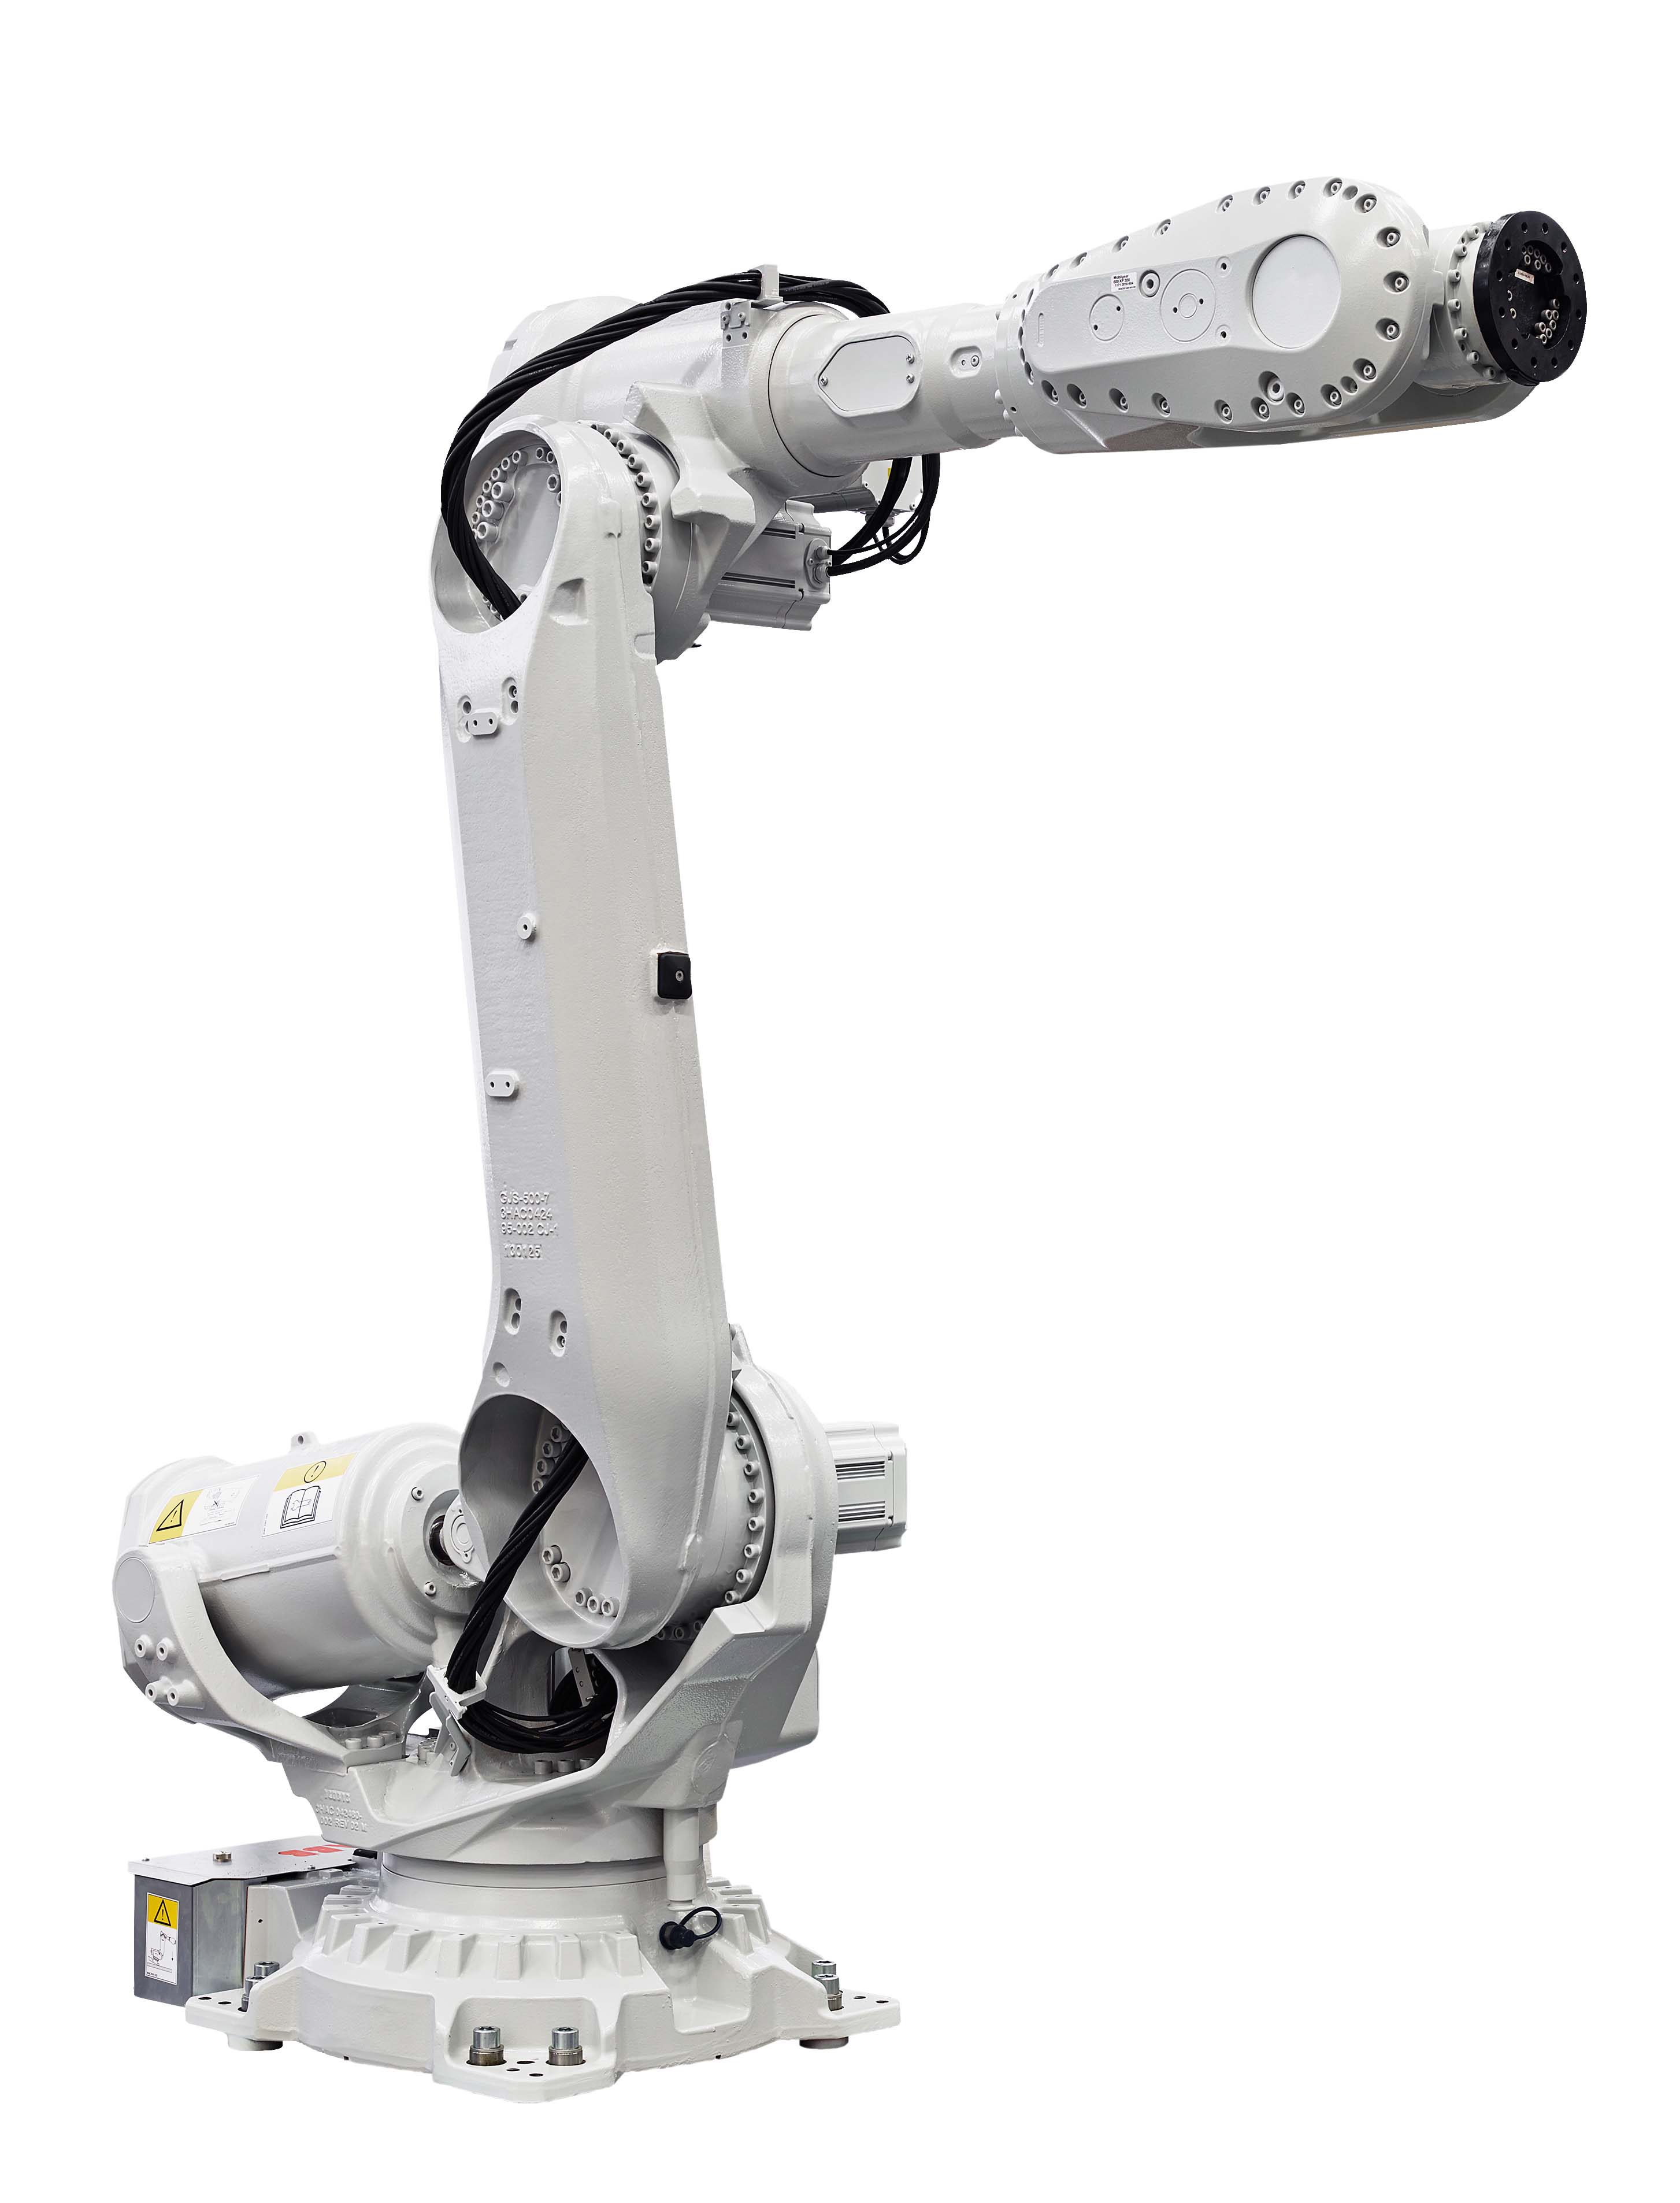 Multi Axis Robot equipped with Camera